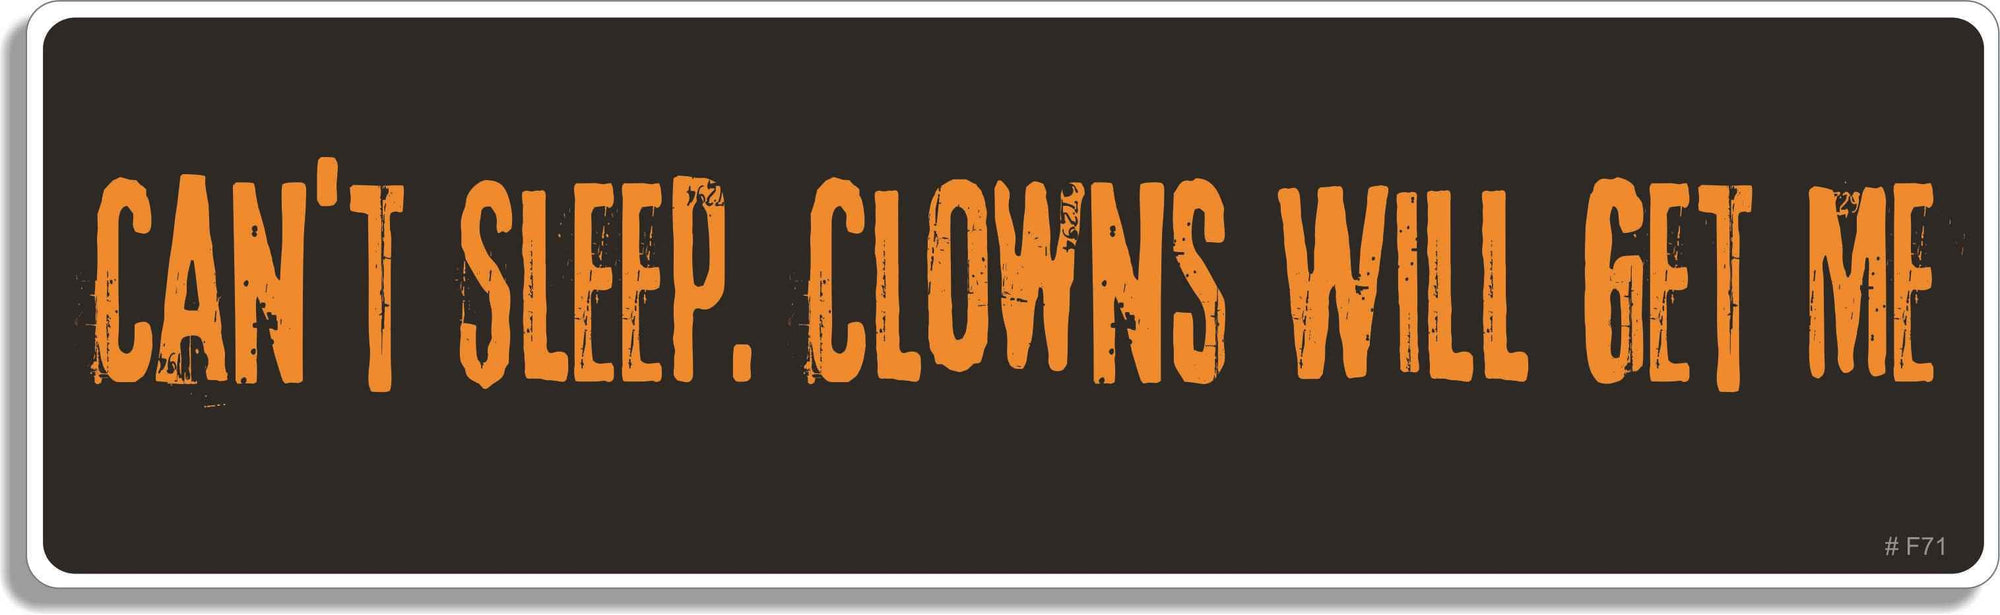 Can't sleep - Clowns will get me - 3" x 10" Bumper Sticker--Car Magnet- -  Decal Bumper Sticker-funny Bumper Sticker Car Magnet Can't sleep-Clowns will get me-  Decal for carsDark and surreal